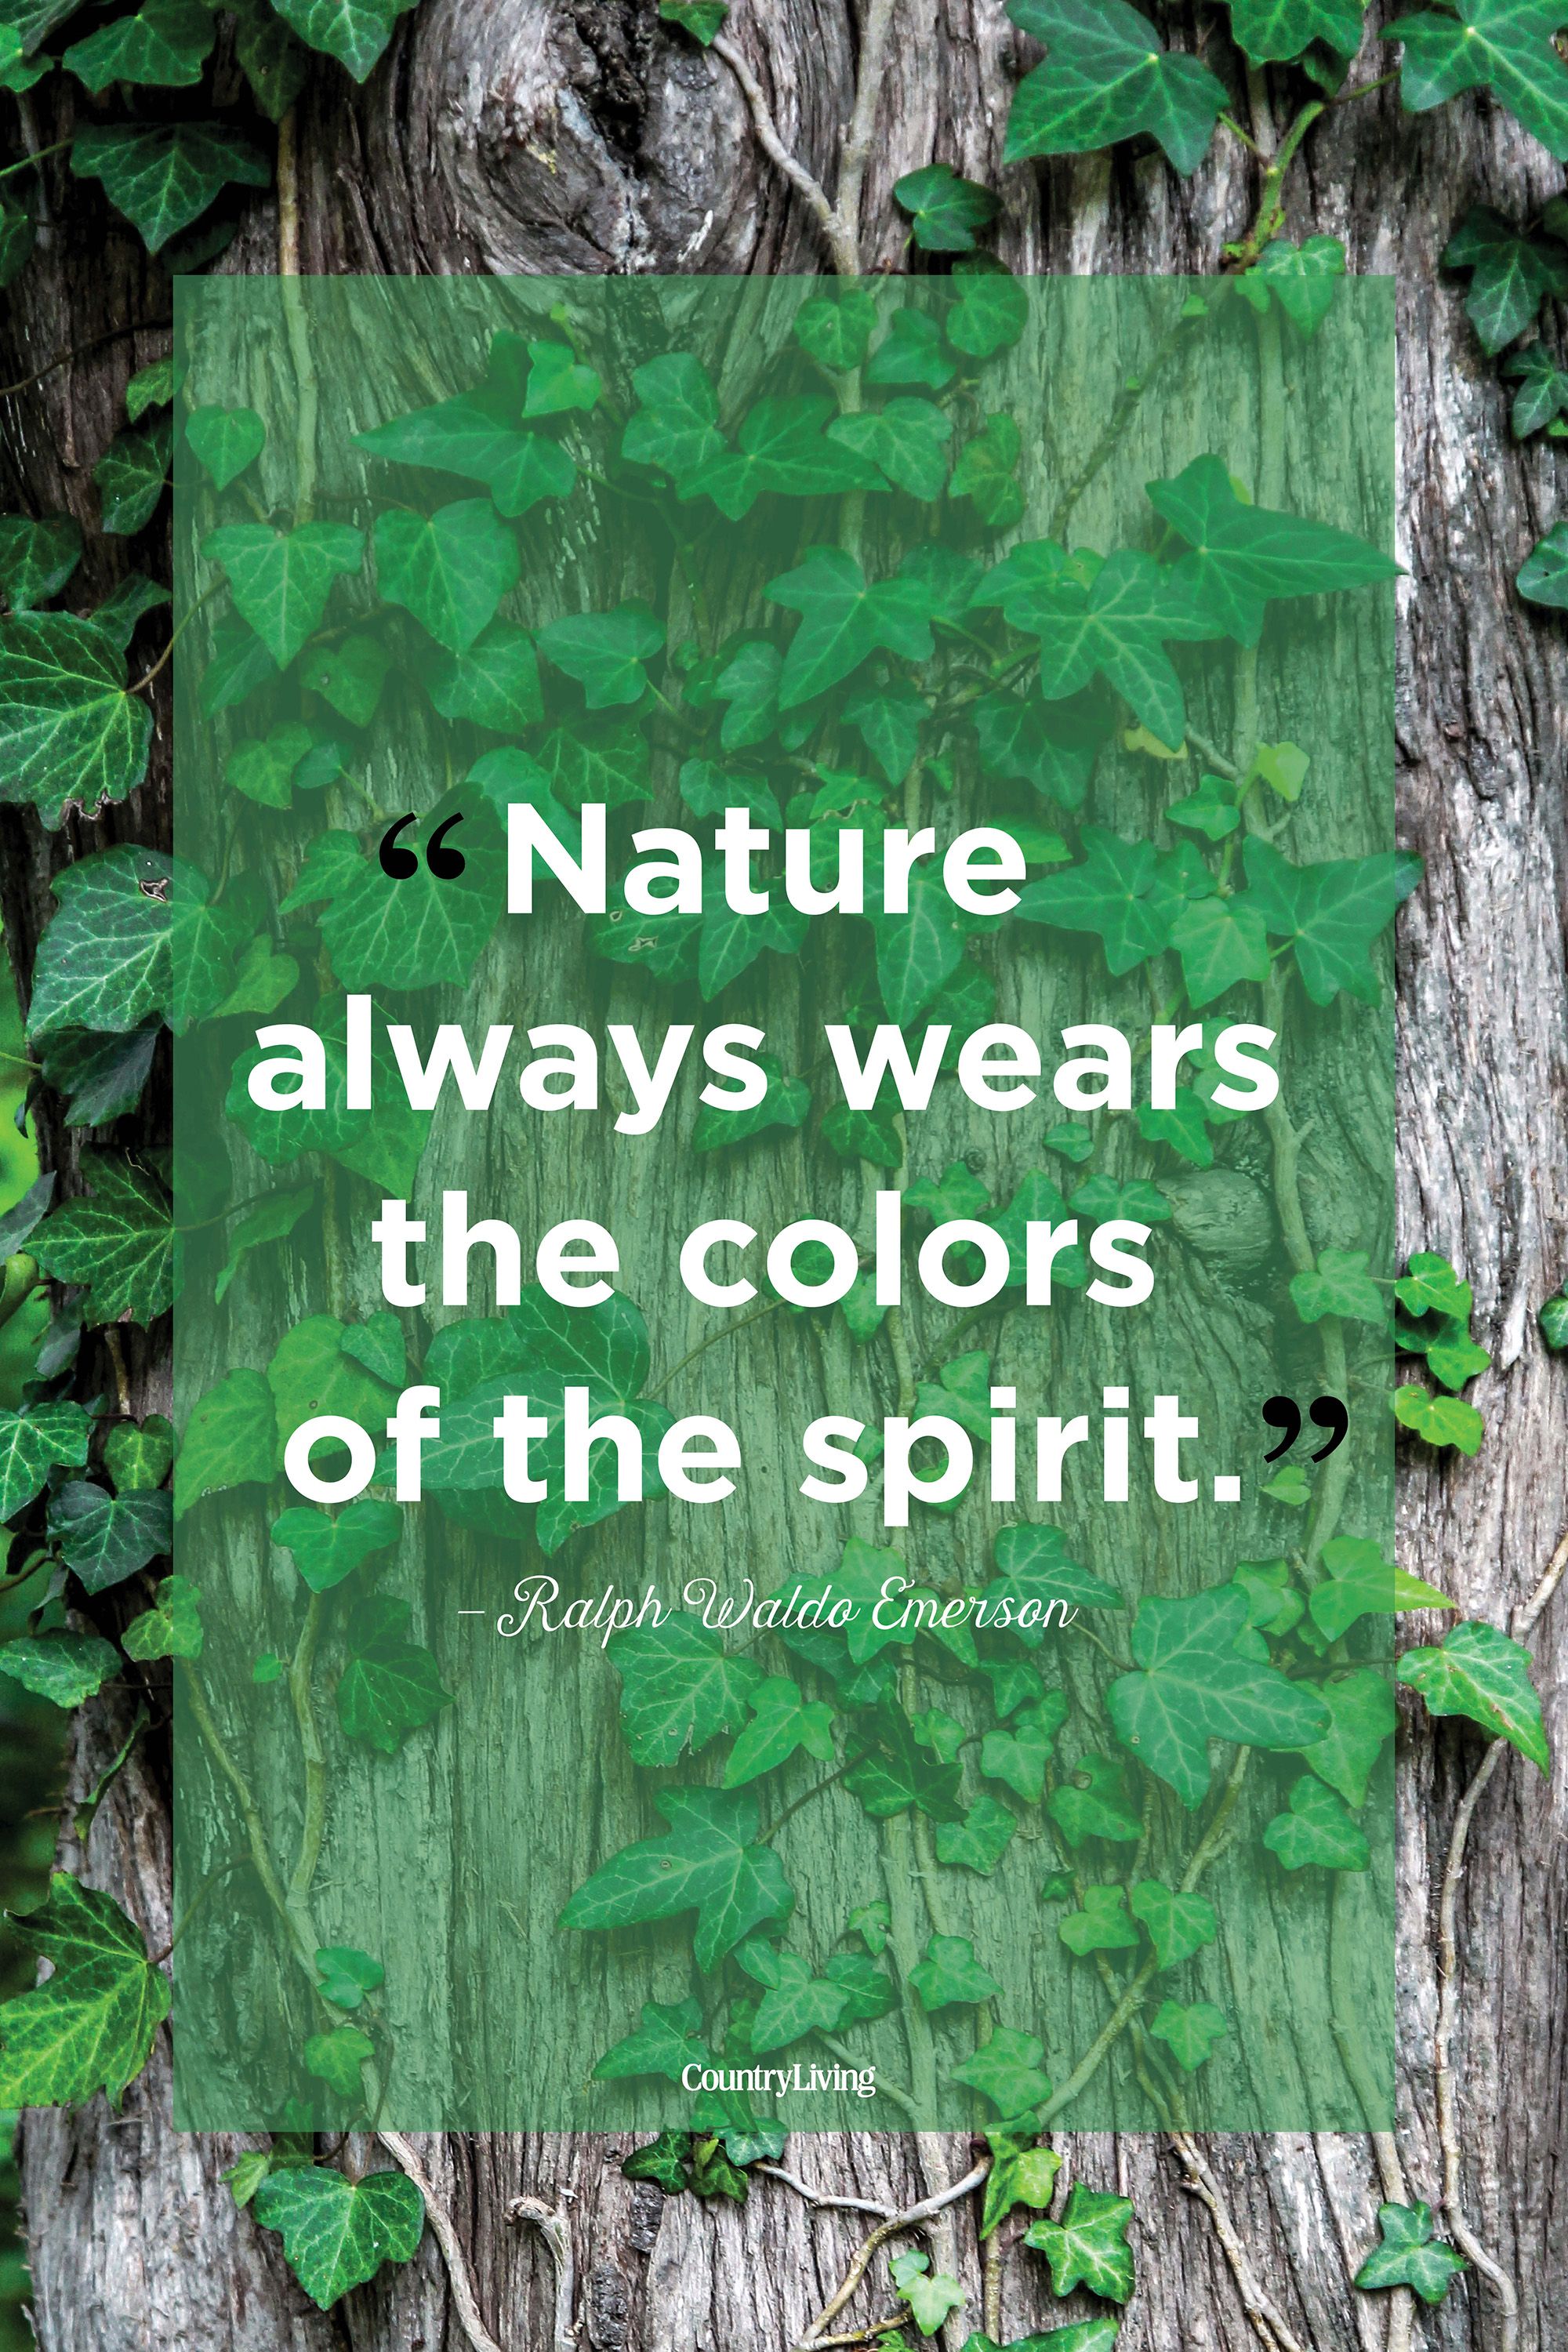 Inspicere Medicinsk hånd 58 Best Nature Quotes - Inspirational Sayings About Nature